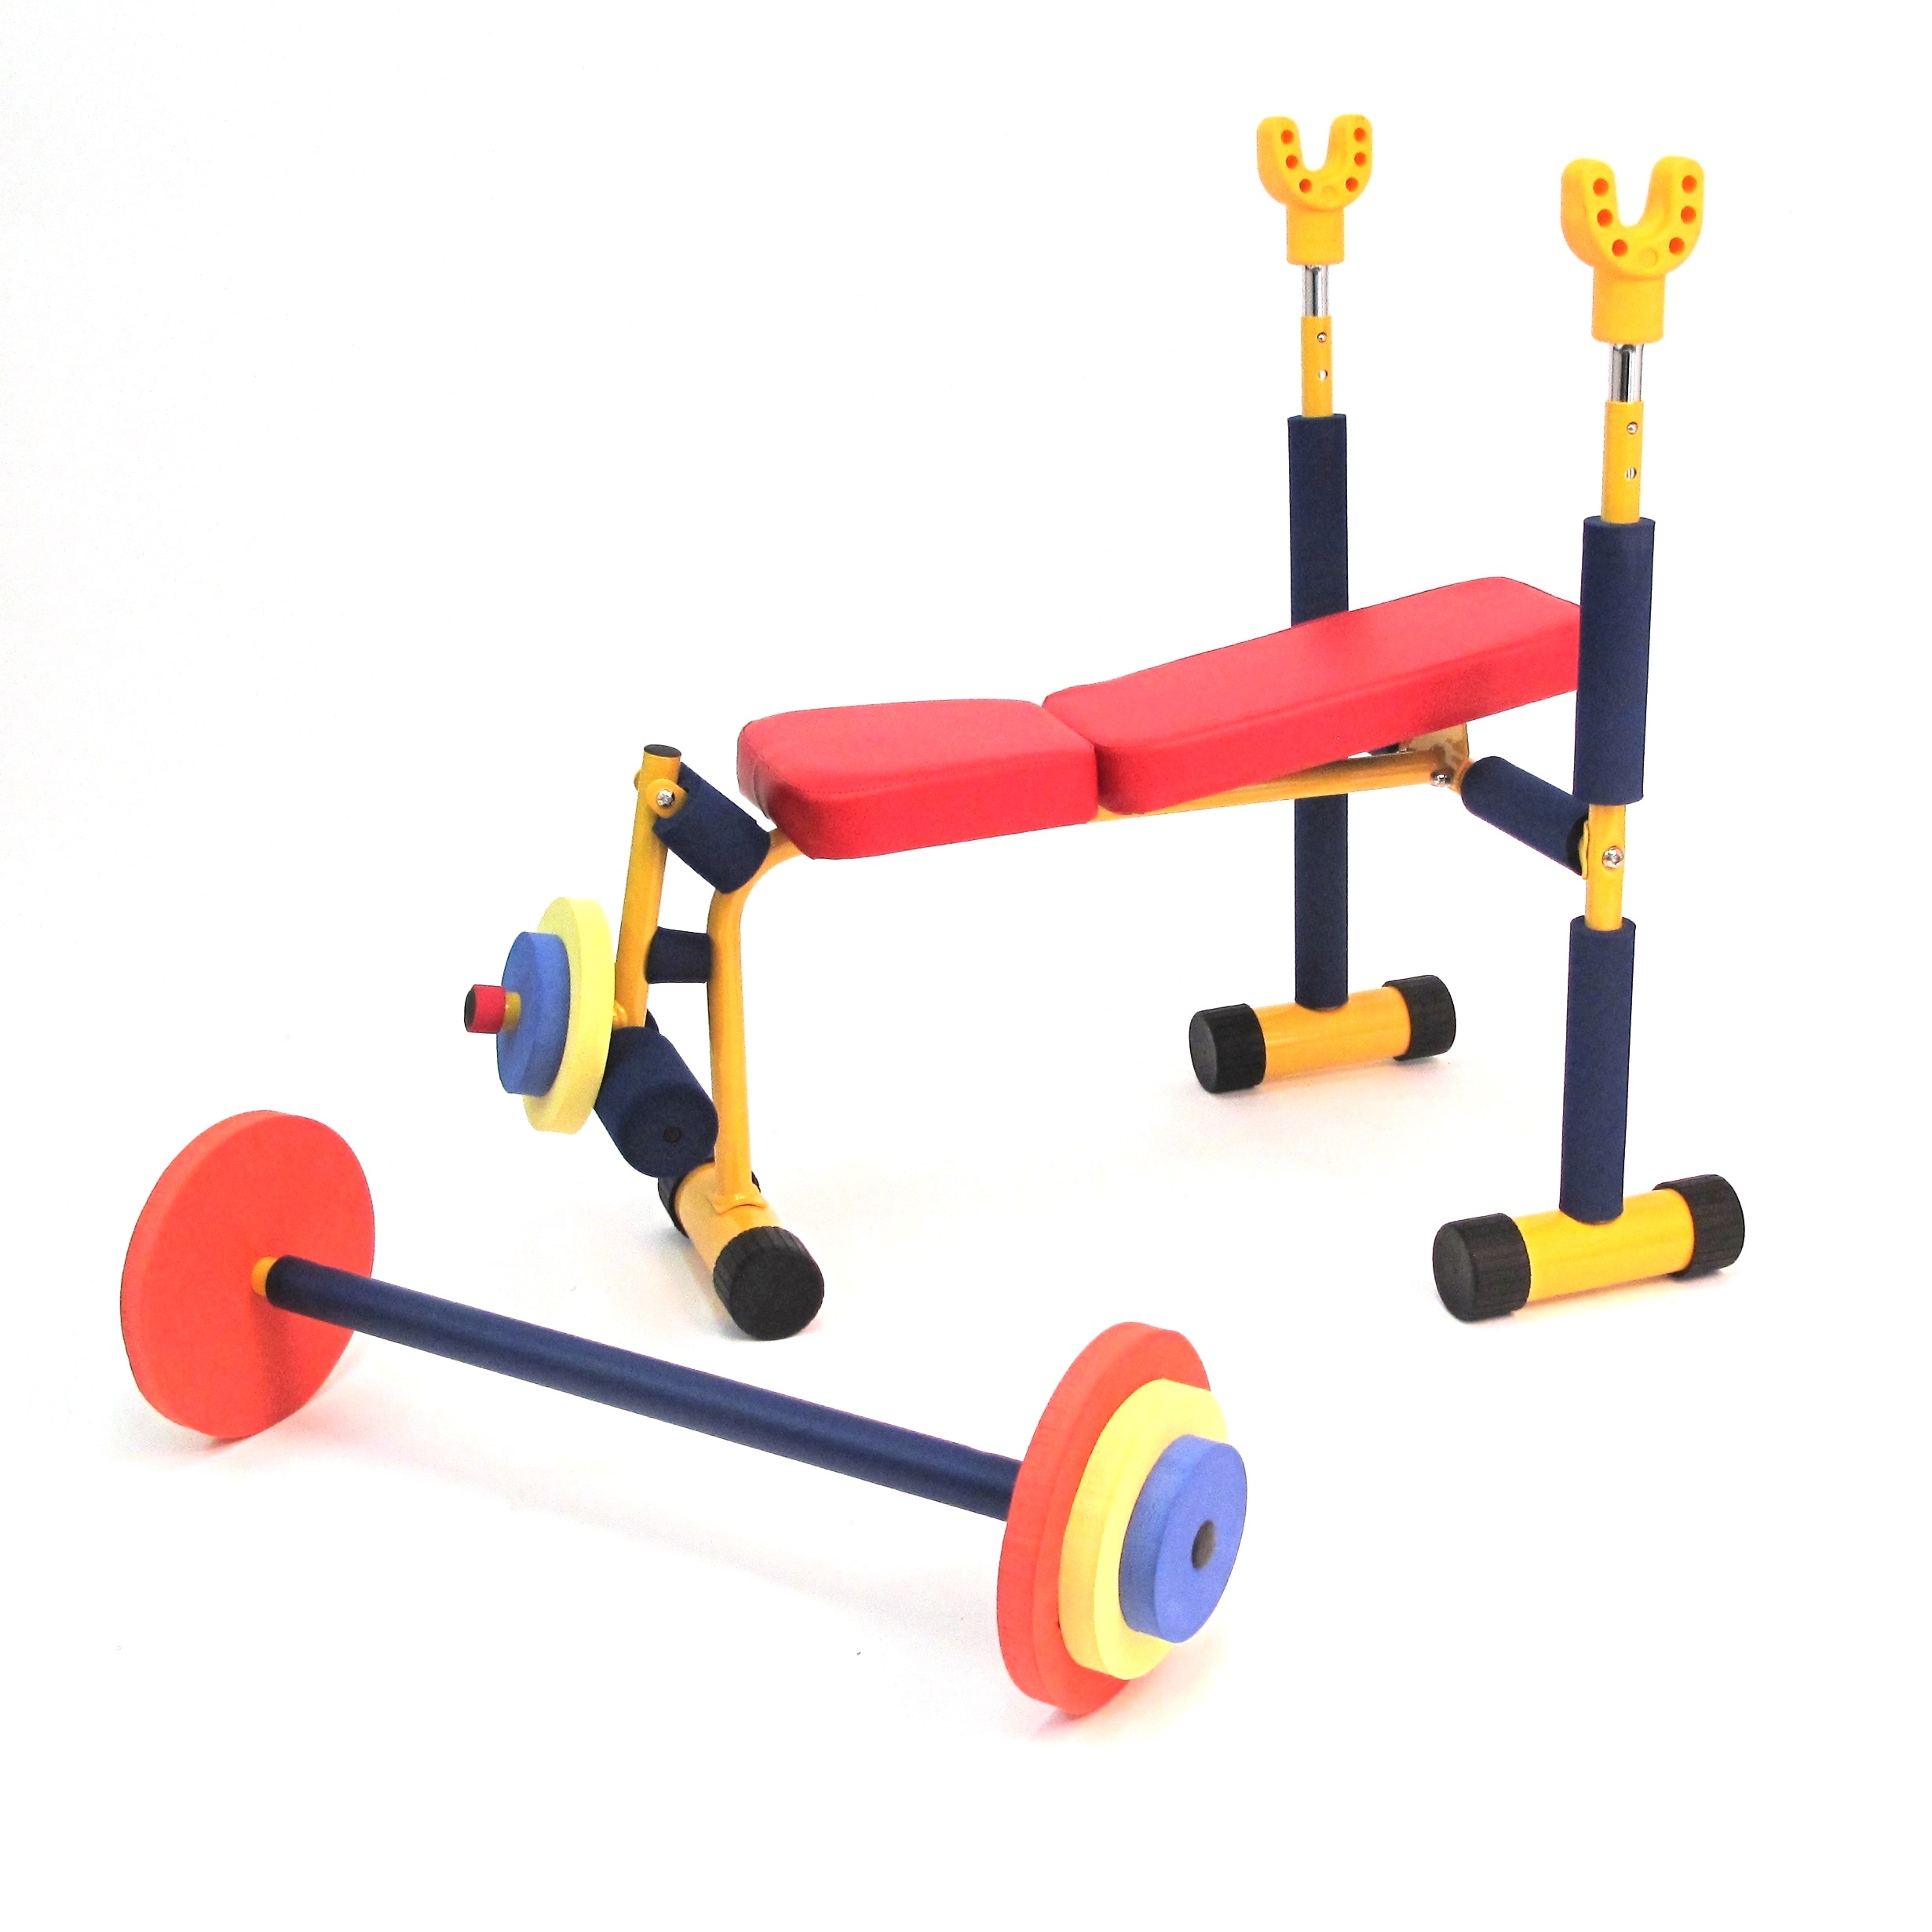 https://visualhunt.com/photos/16/redmon-fun-and-fitness-exercise-equipment-for-kids-weight-bench-set.jpg